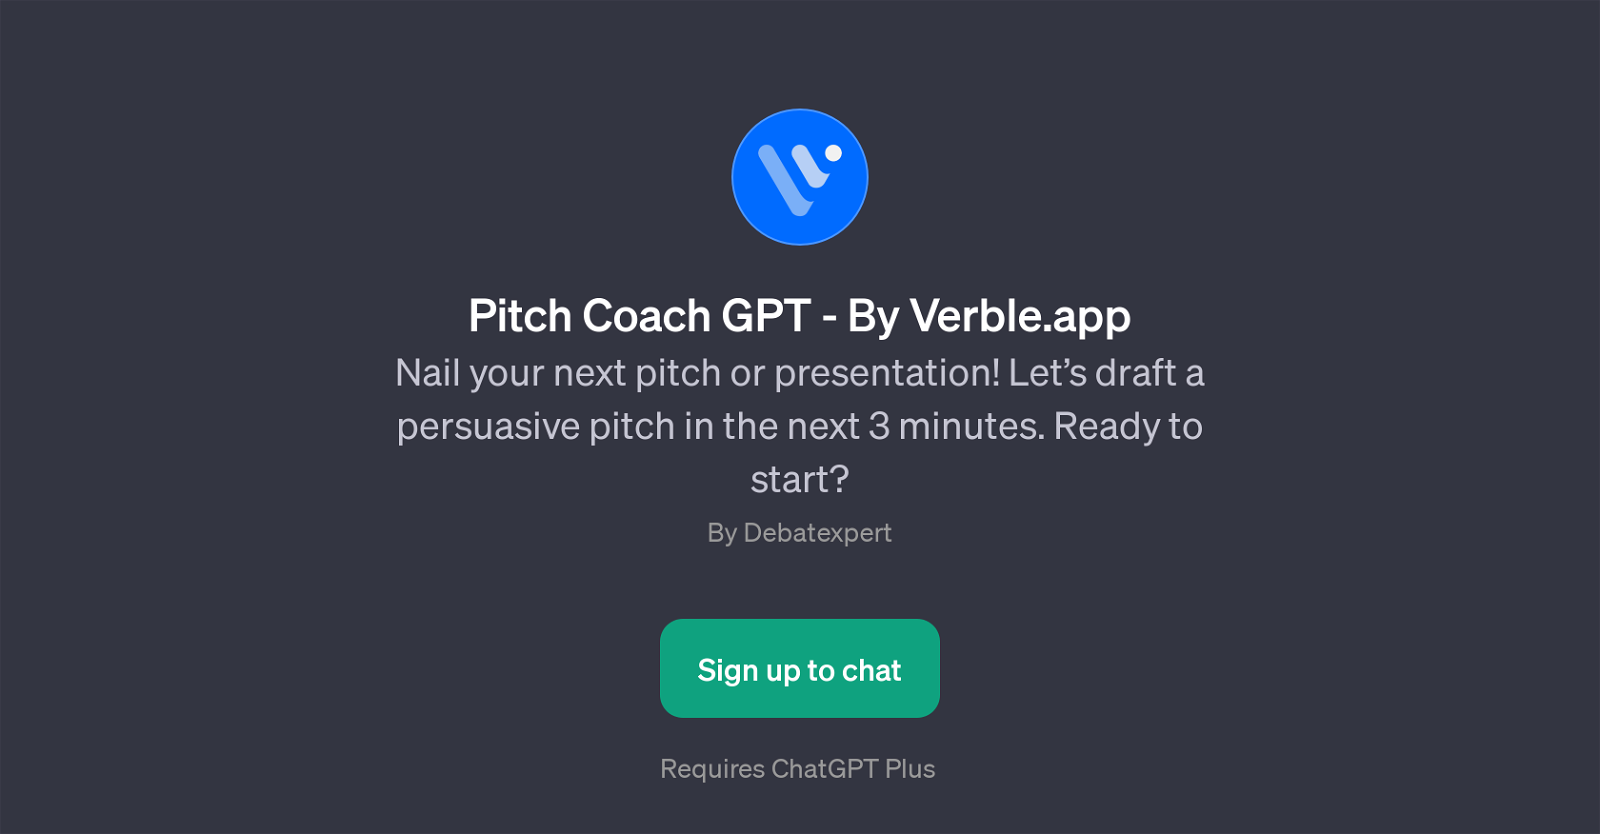 Pitch Coach GPT - By Verble.app website